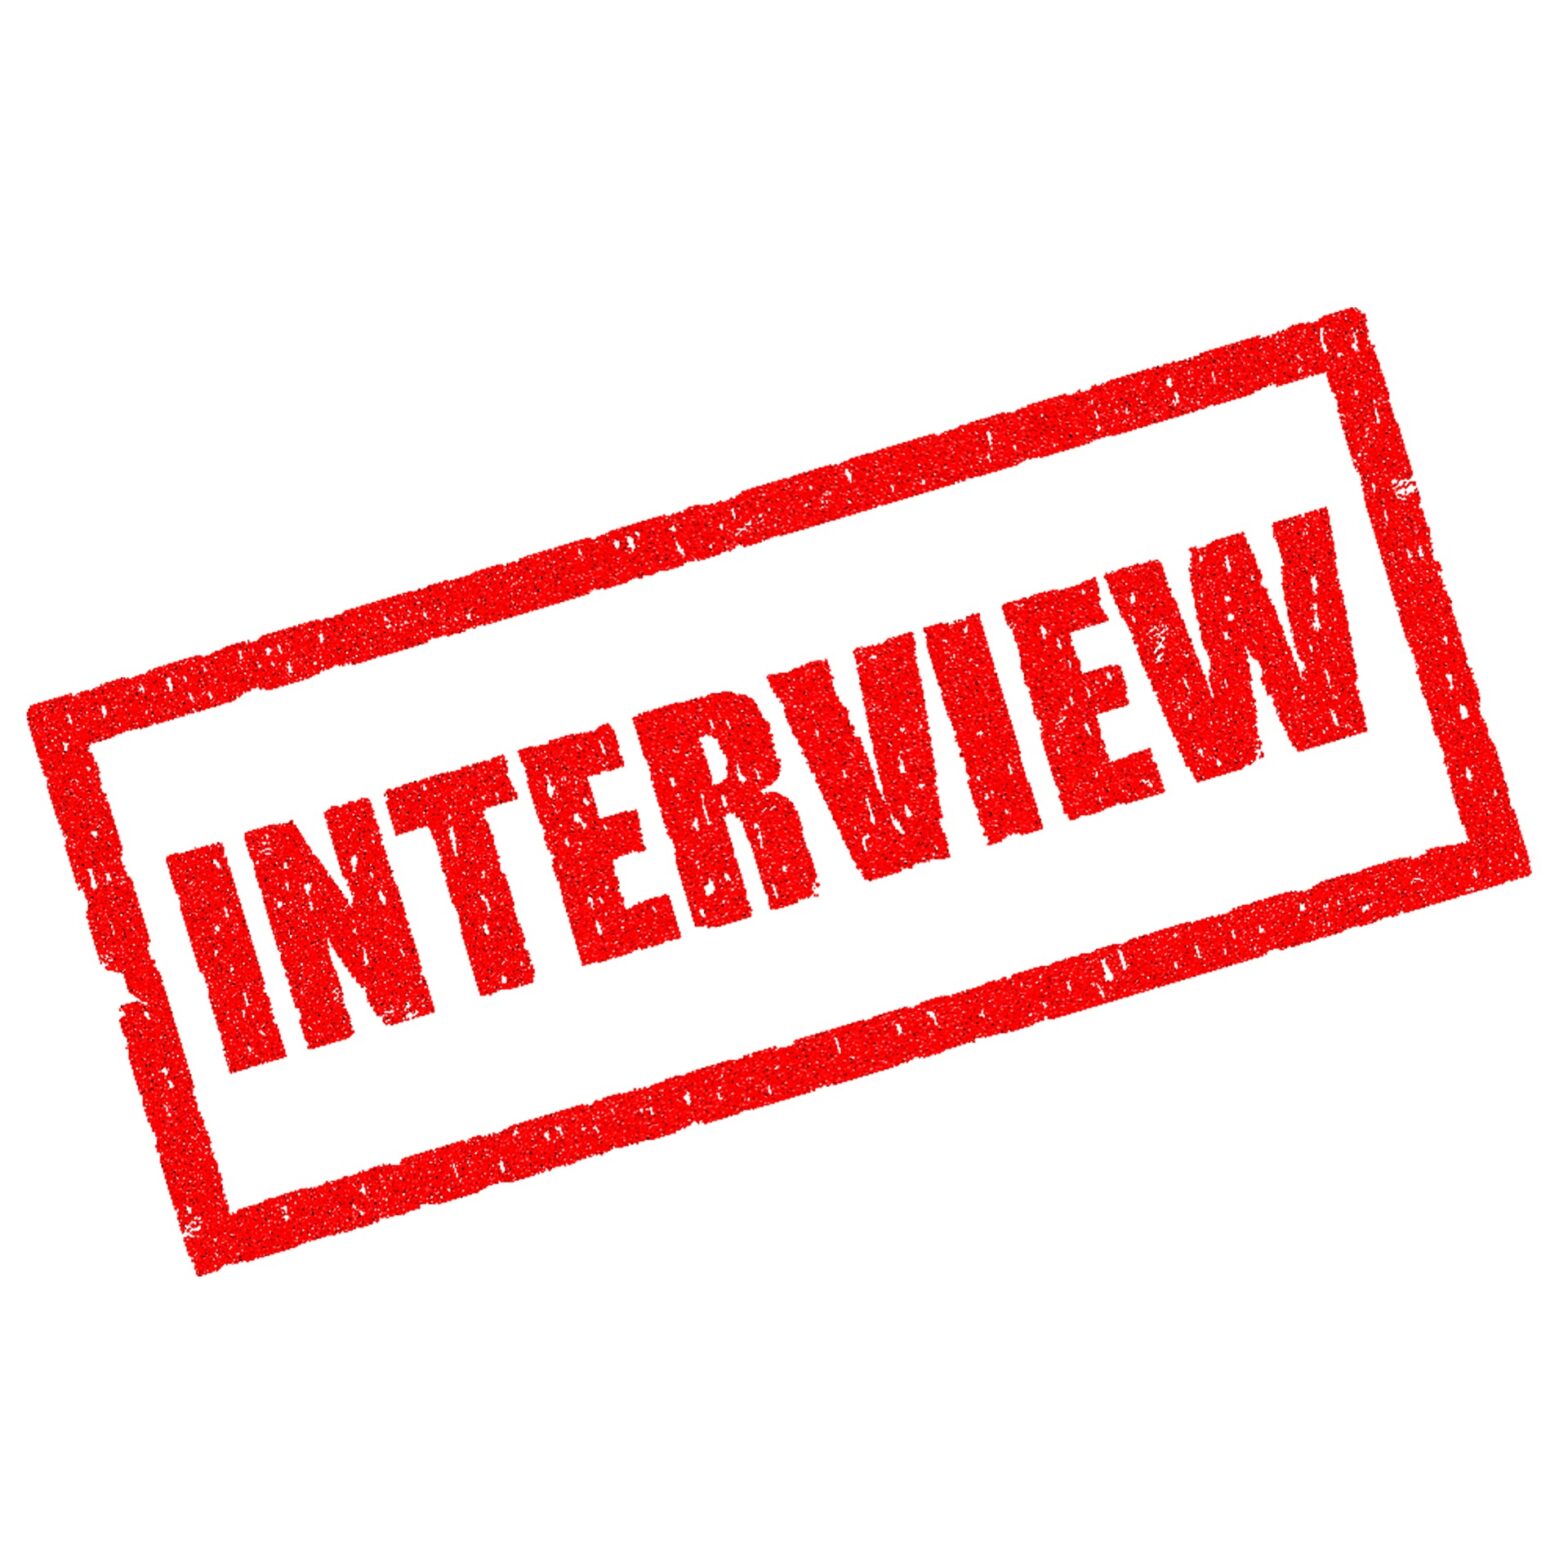 Interview Tips for Aspiring Beauticians